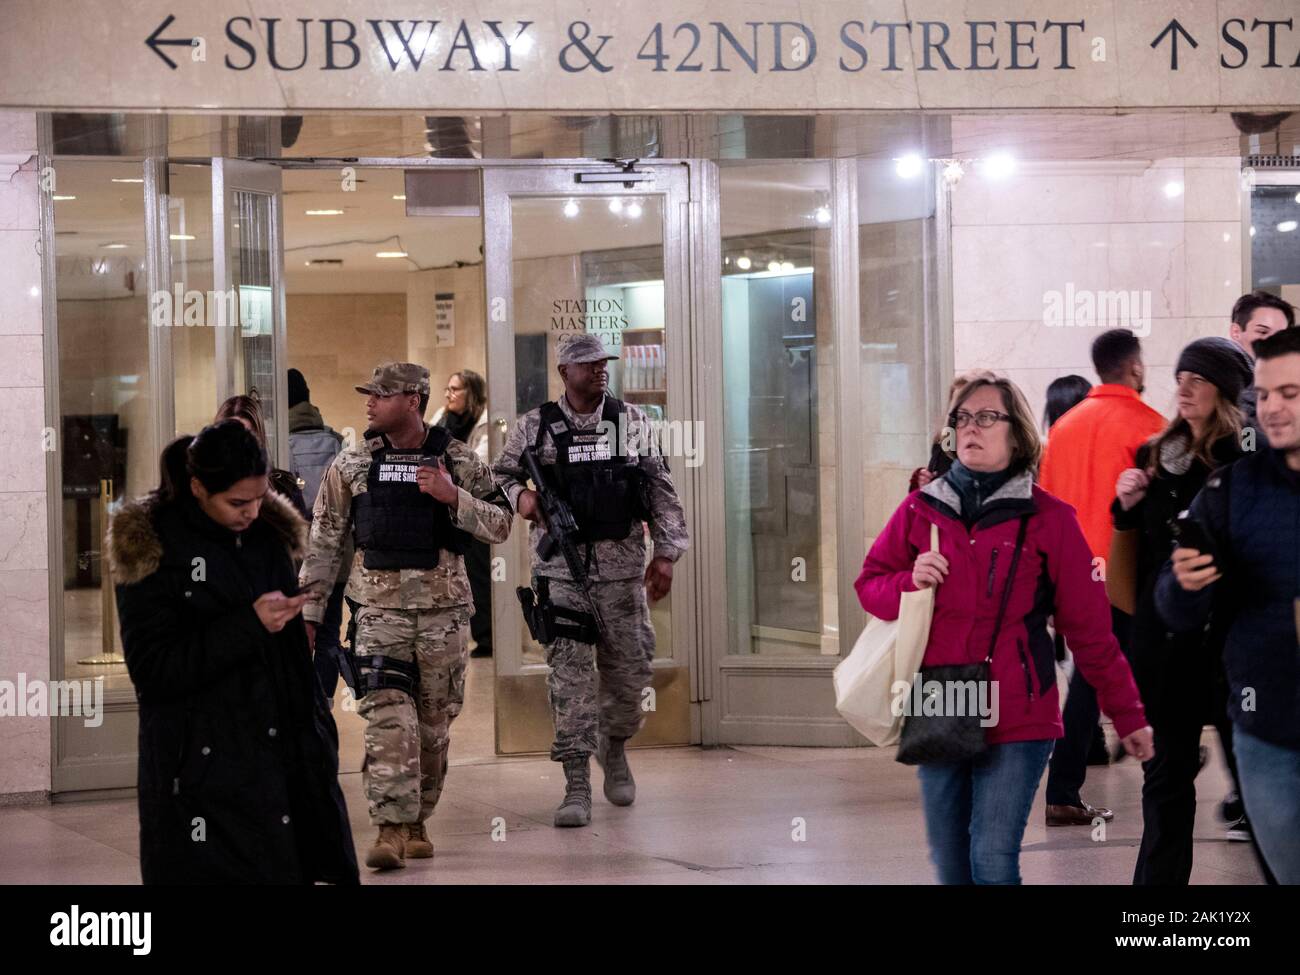 New York, USA. 6th Jan, 2020. Members of Joint Task Force patrol at the Grand Central Terminal in New York, the United States, Jan. 6, 2020. New York City (NYC) has stepped up security at key locations following the targeted killing of Iranian commander Qasem Soleimani by a U.S. airstrike in Iraq. Credit: Wang Ying/Xinhua/Alamy Live News Stock Photo